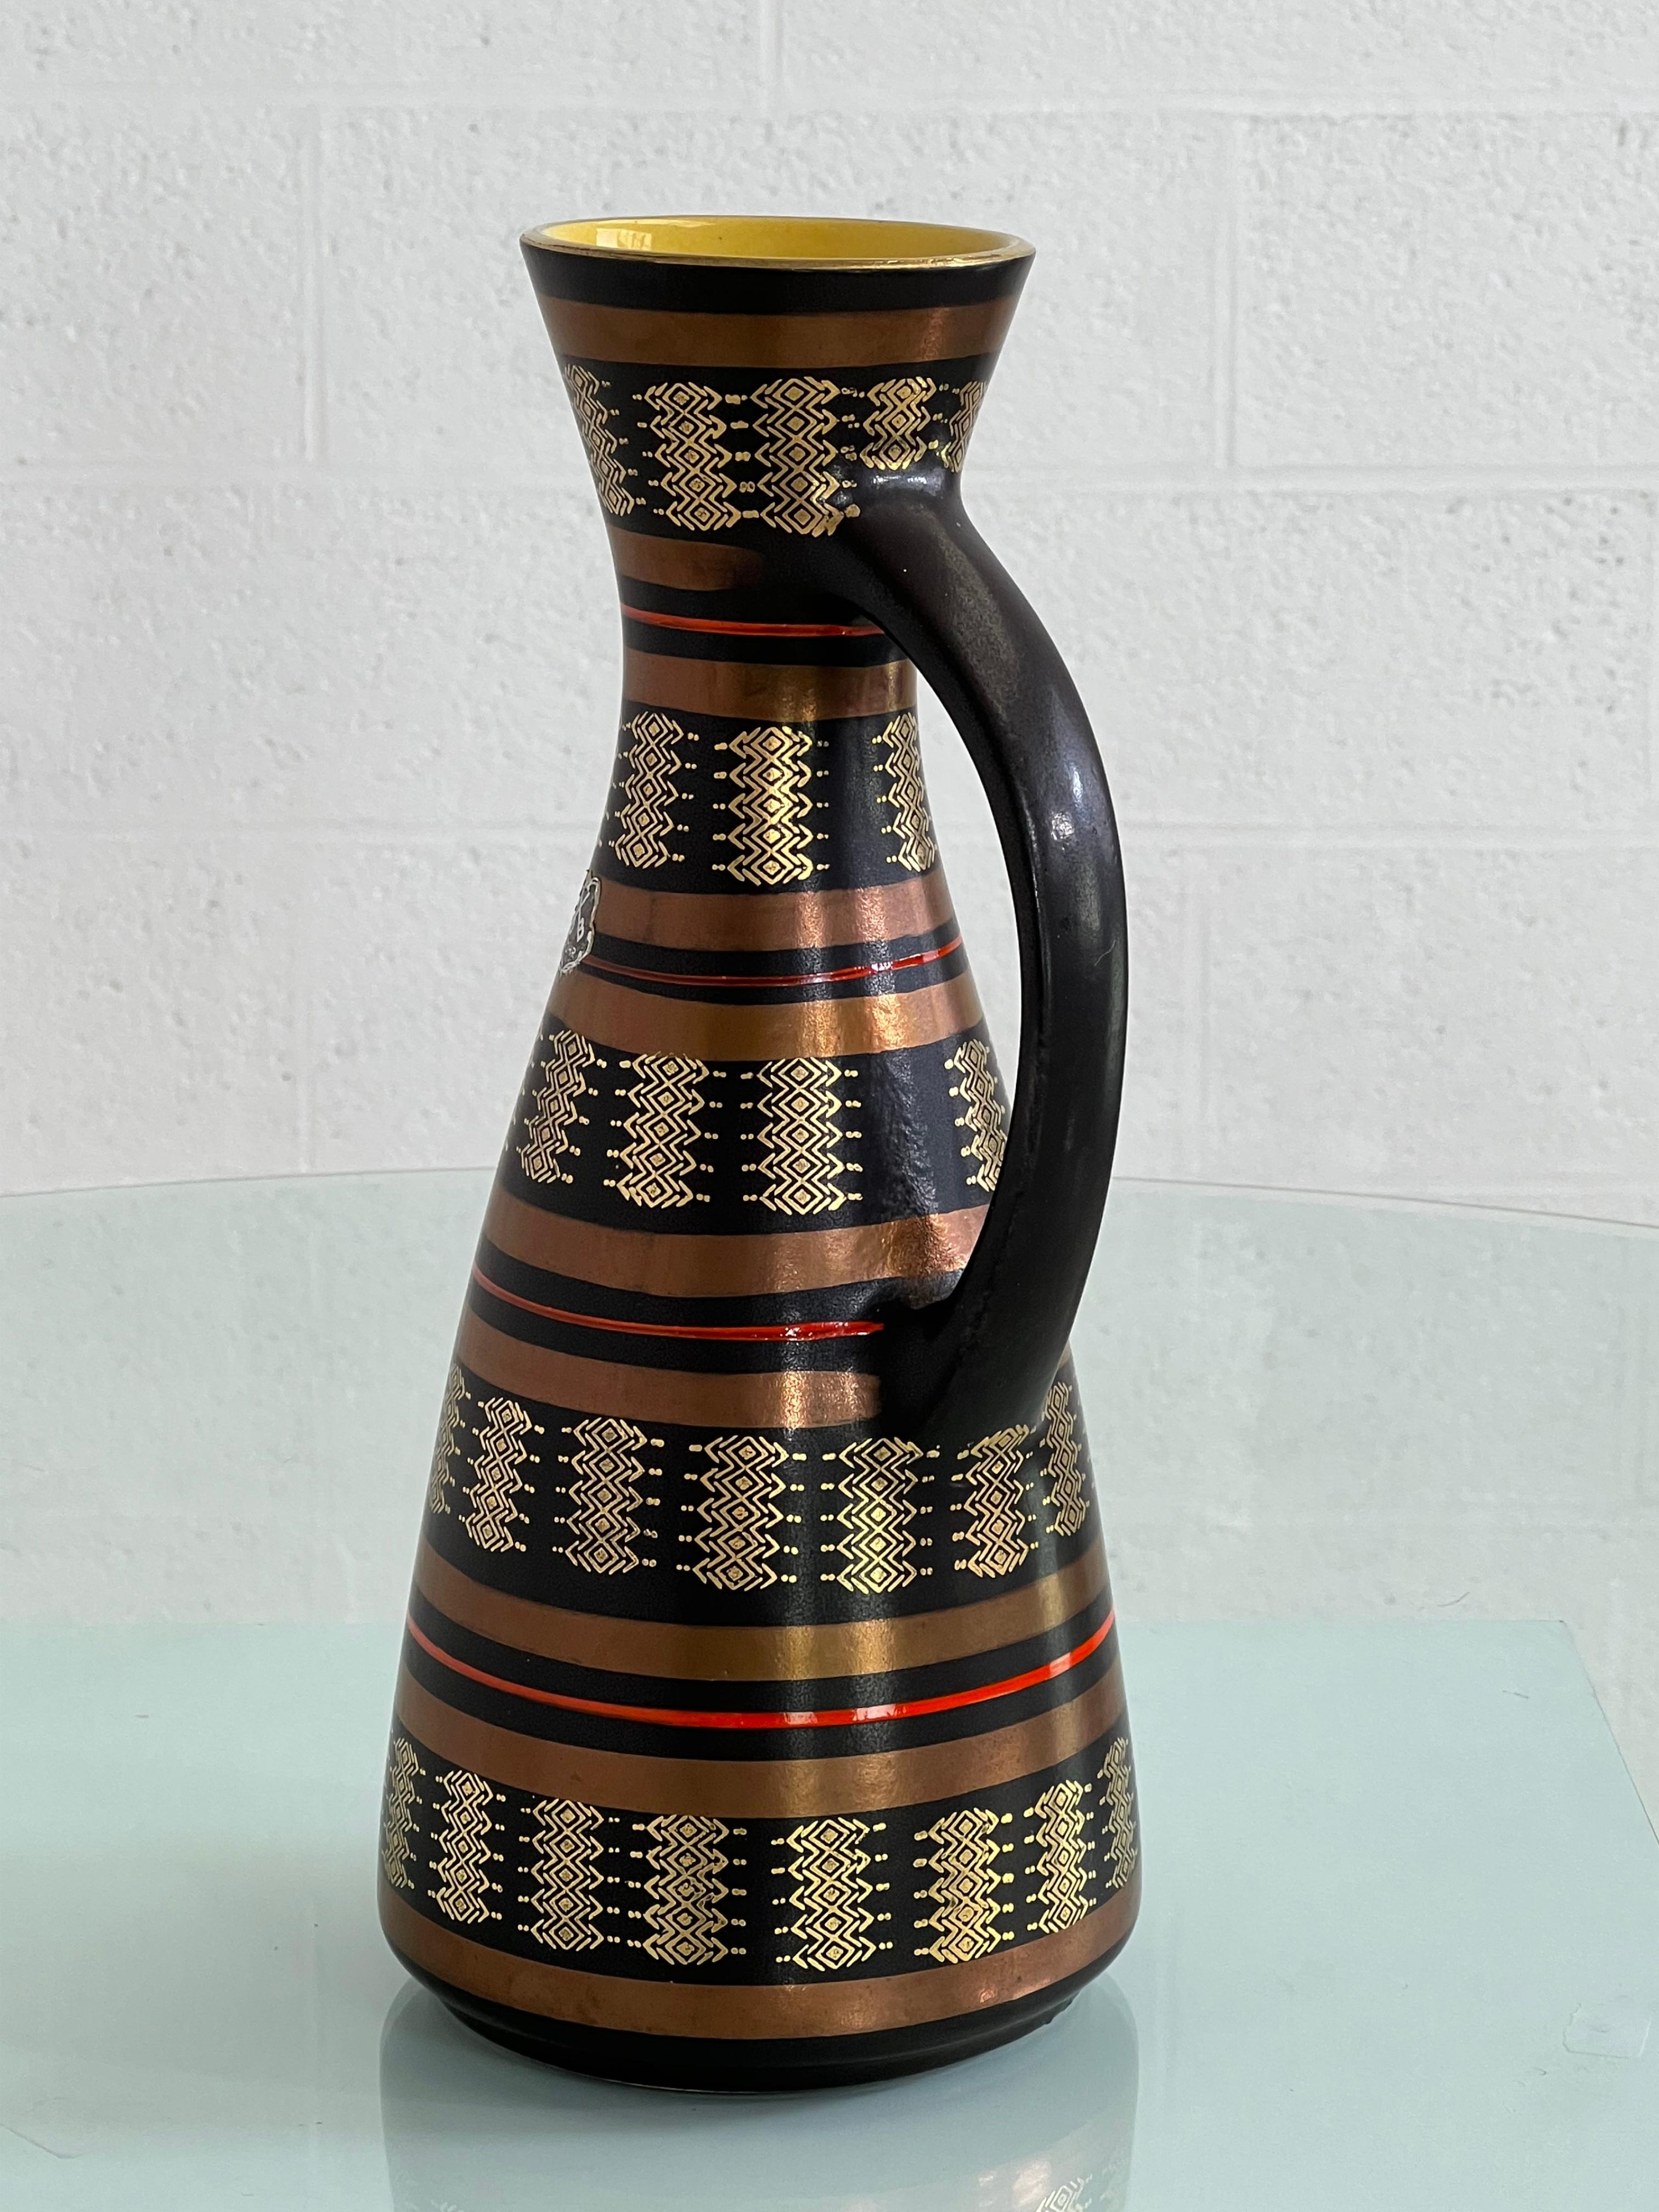 1960s West Germany Handmade Ceramic Vase Copper And Gold Color Finishes In Good Condition For Sale In Tourcoing, FR